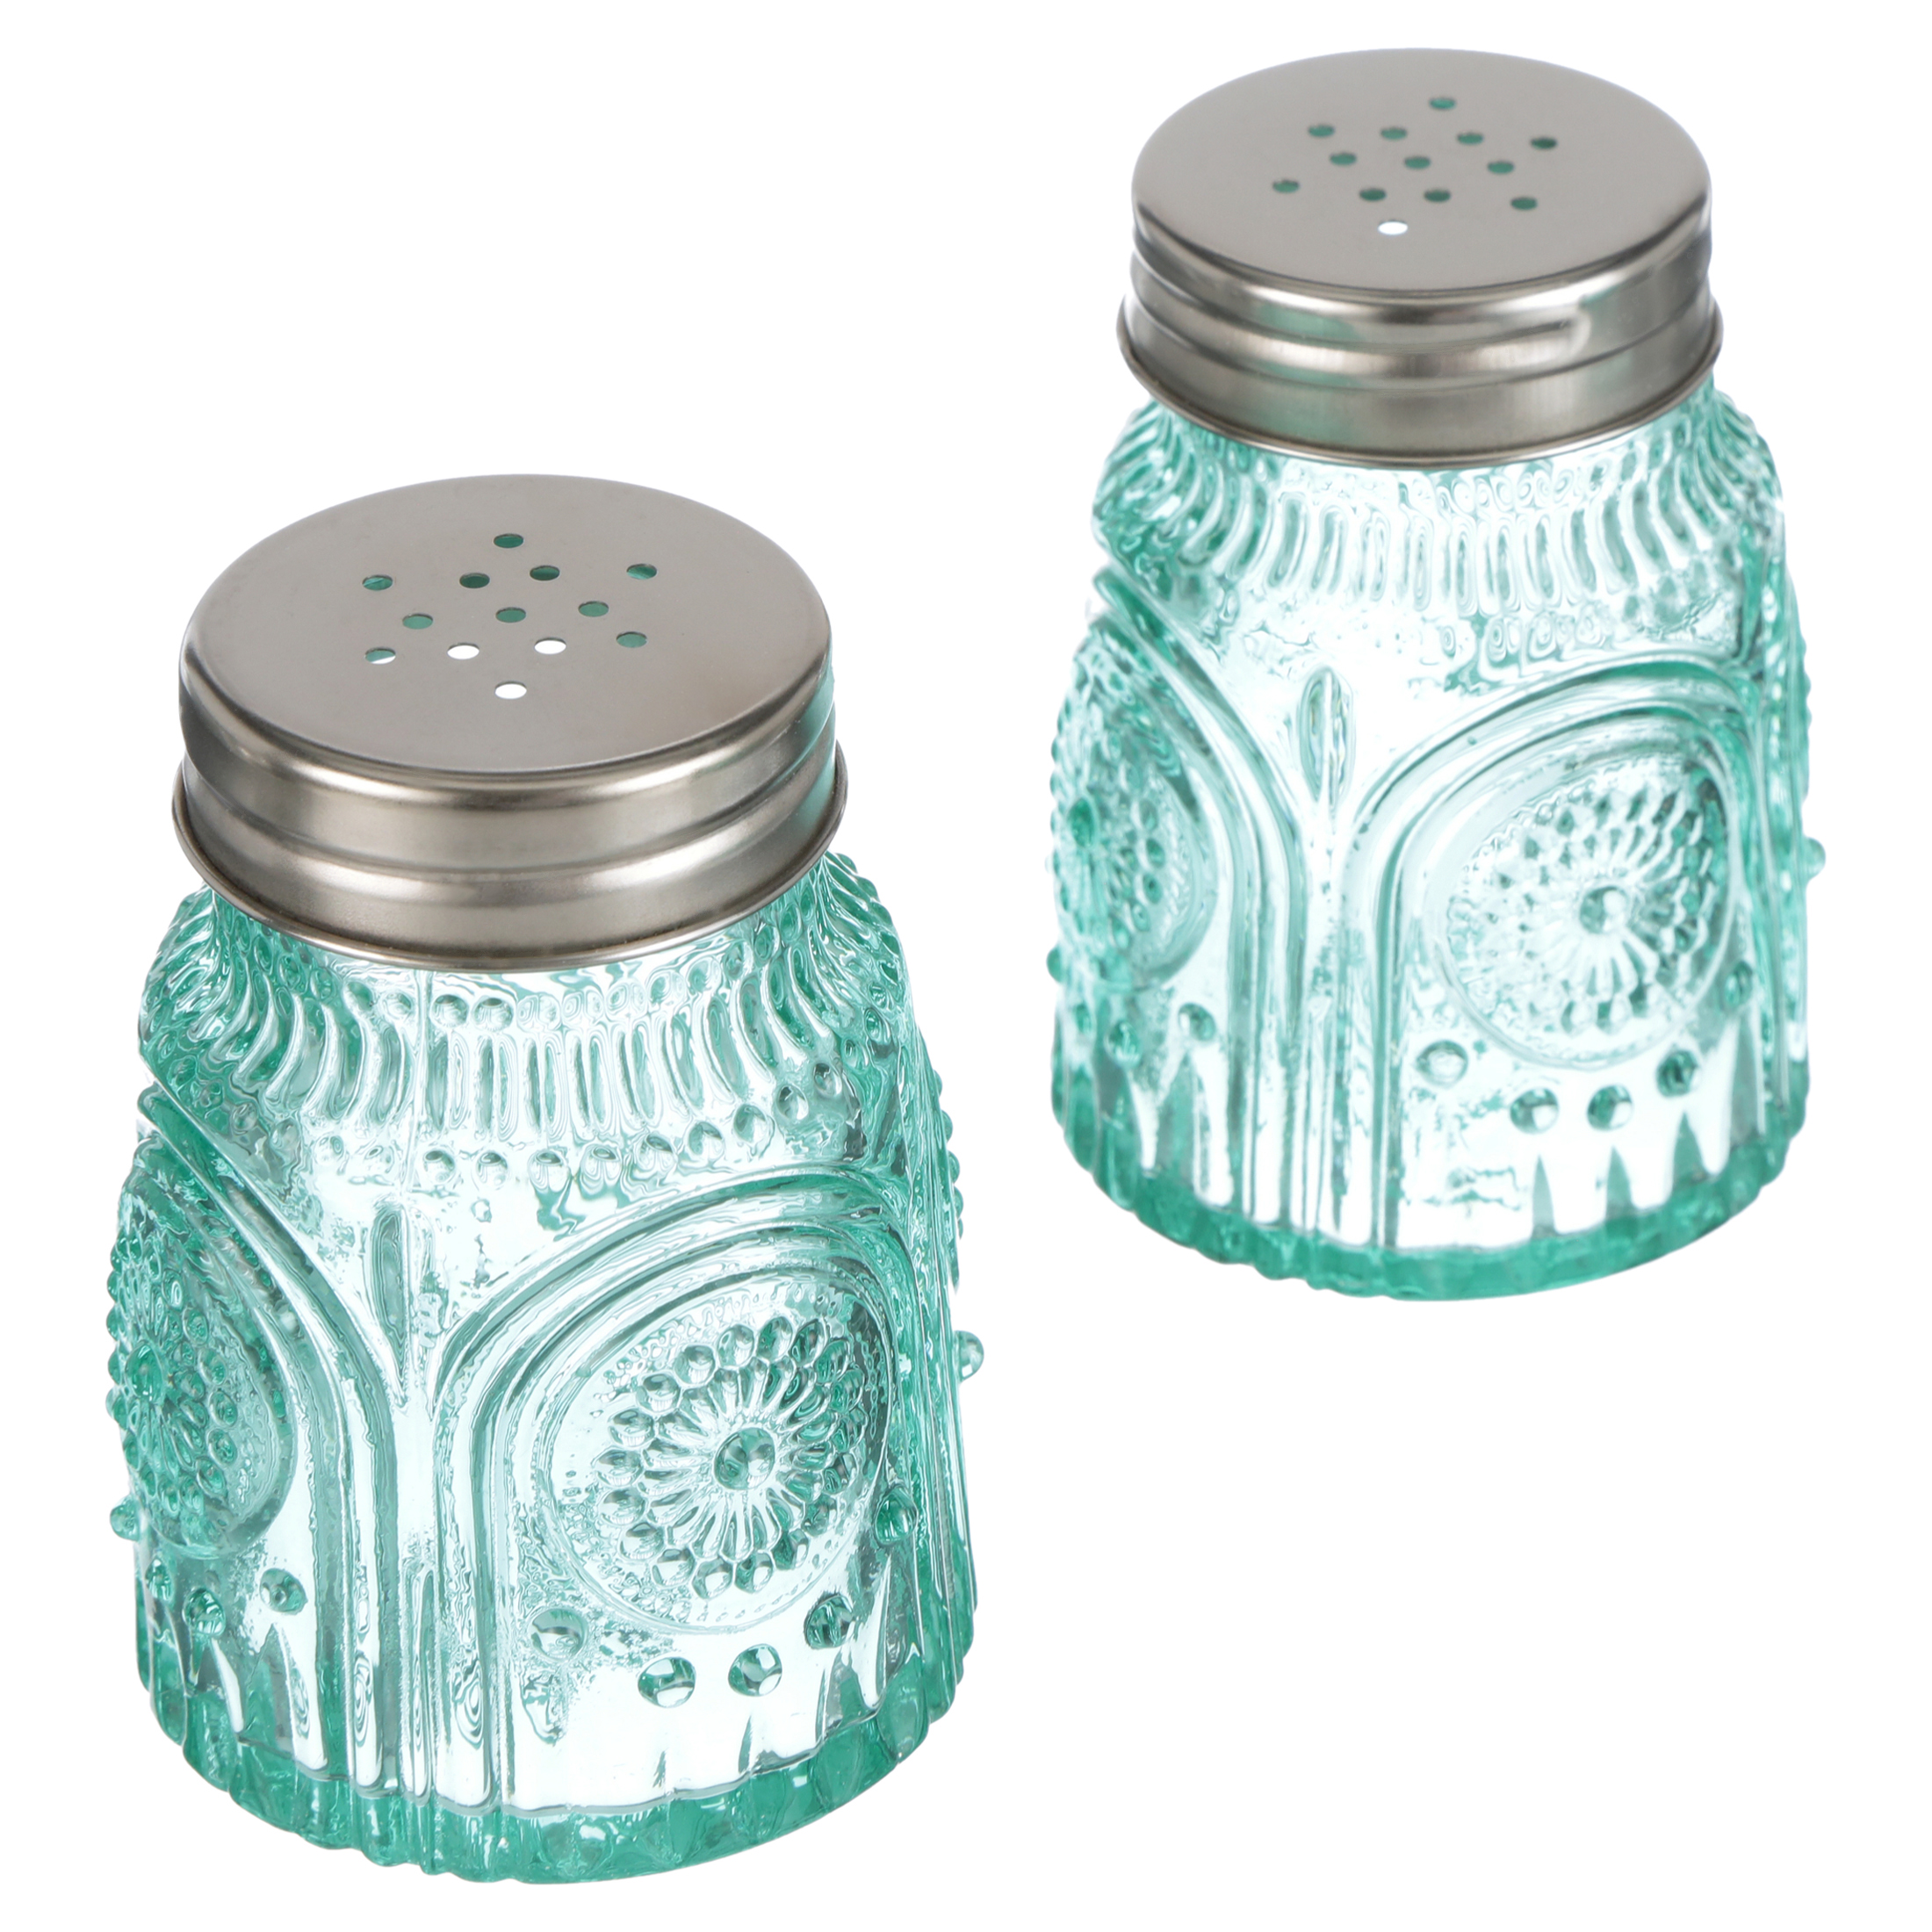 The Pioneer Woman Adeline Glass Butter Dish with Salt And Pepper Shaker Set - image 5 of 9